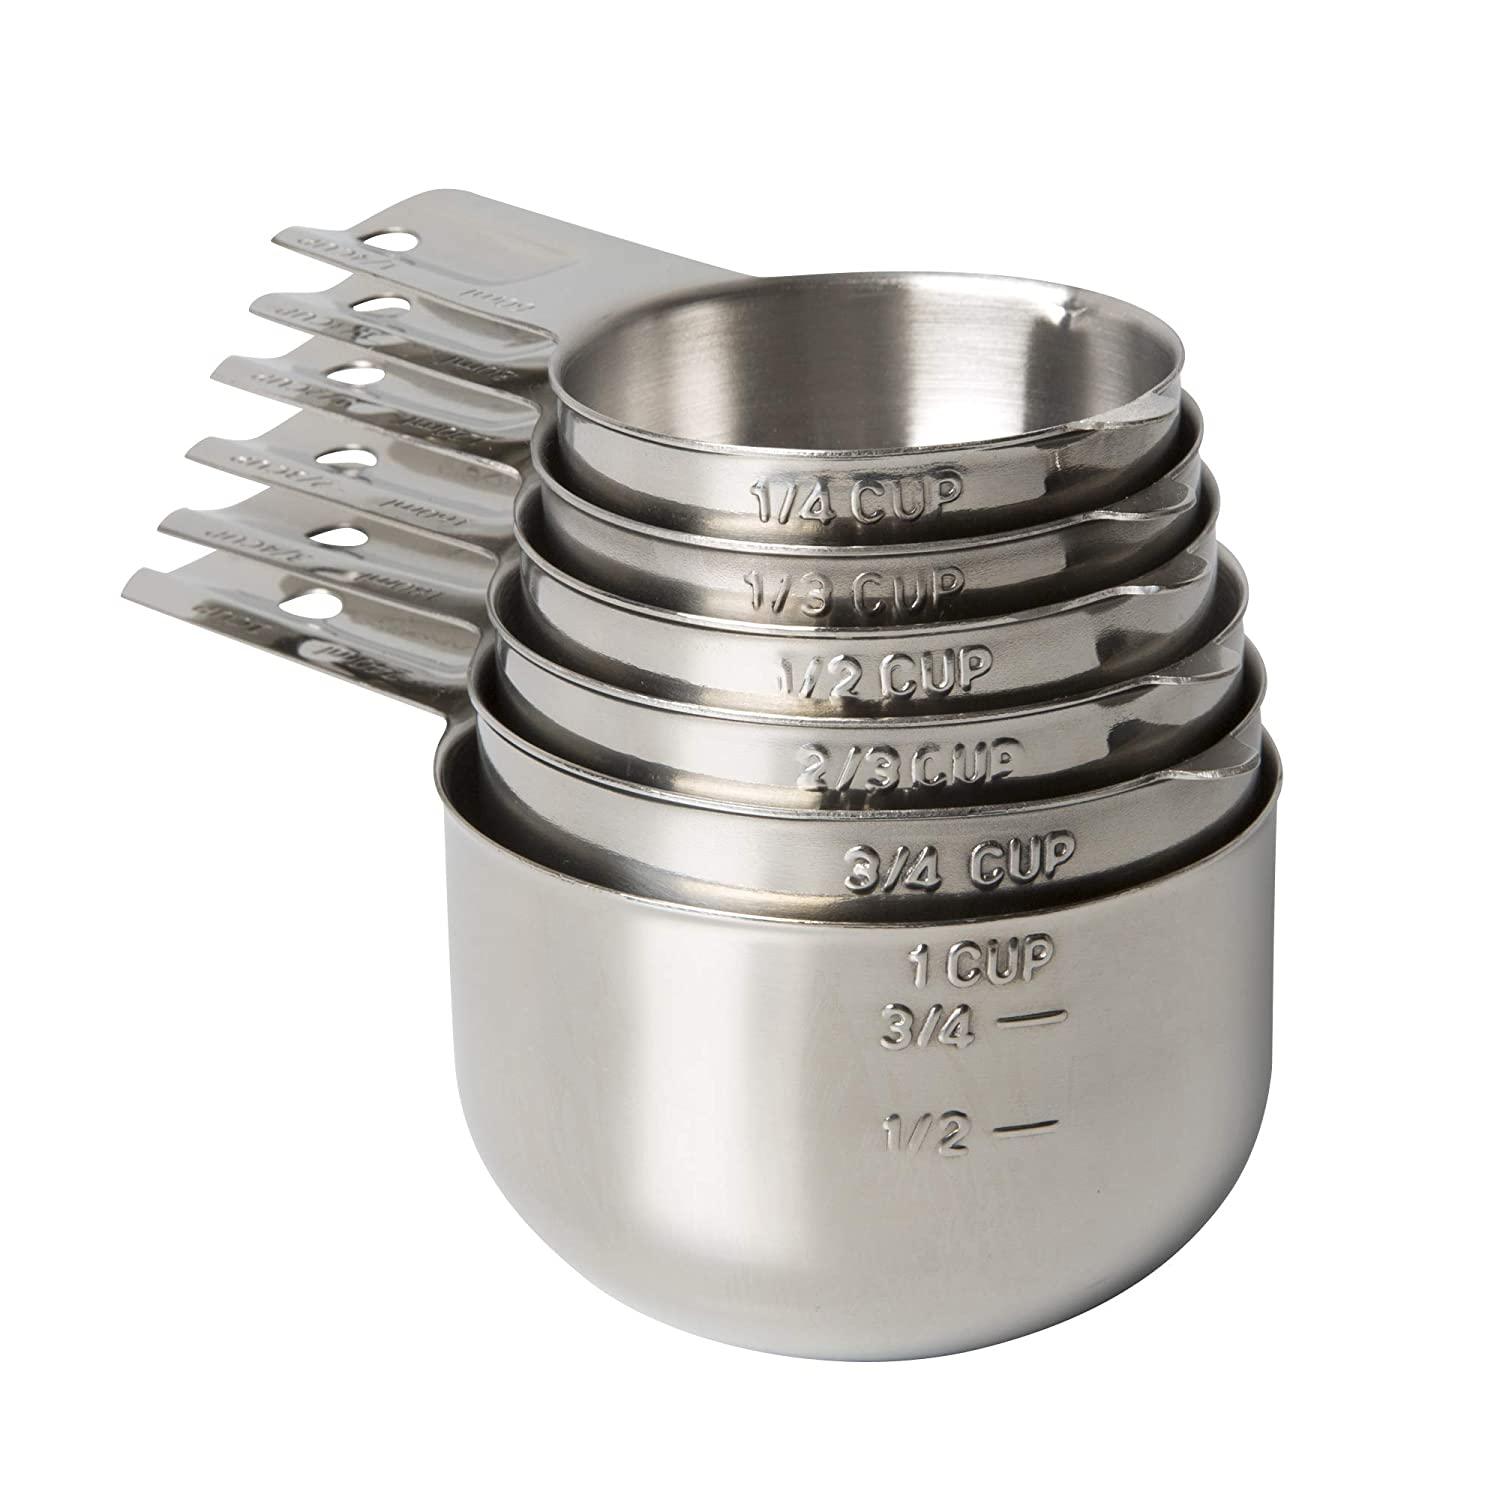 Kitchenmade stainless steel measuring cups, stackable set, silver, 6 pieces